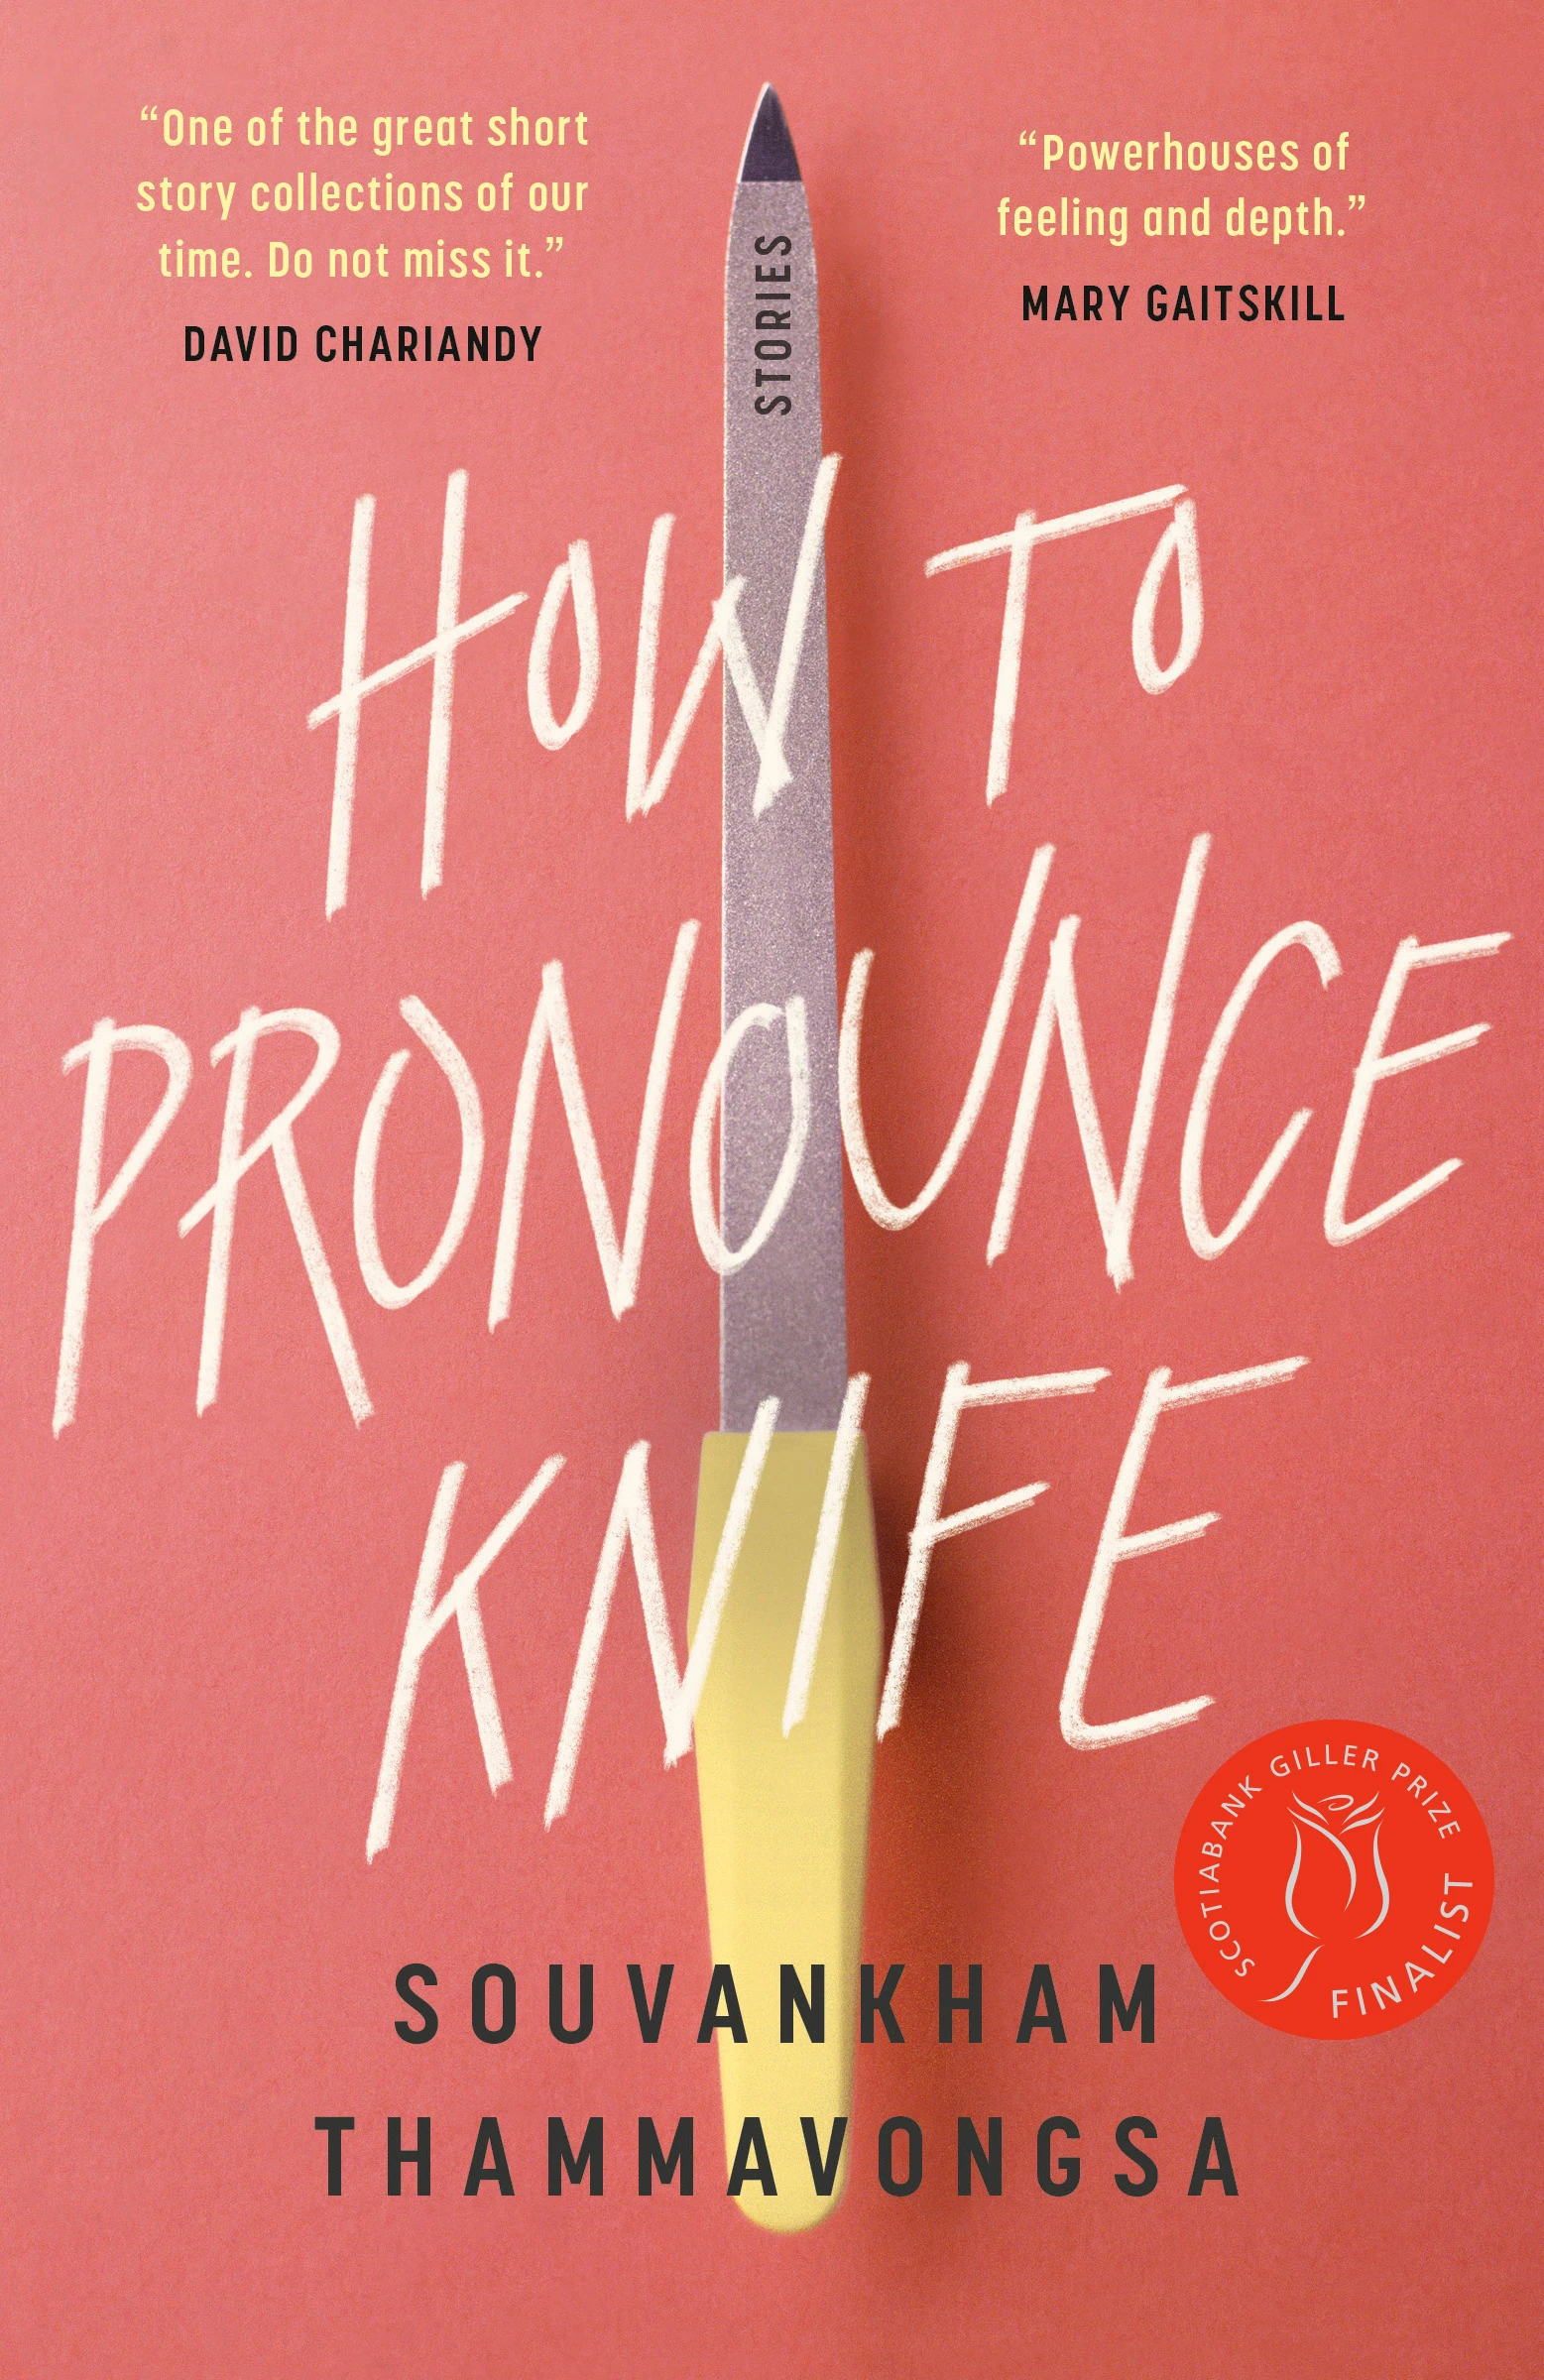 How to Pronounce Knife